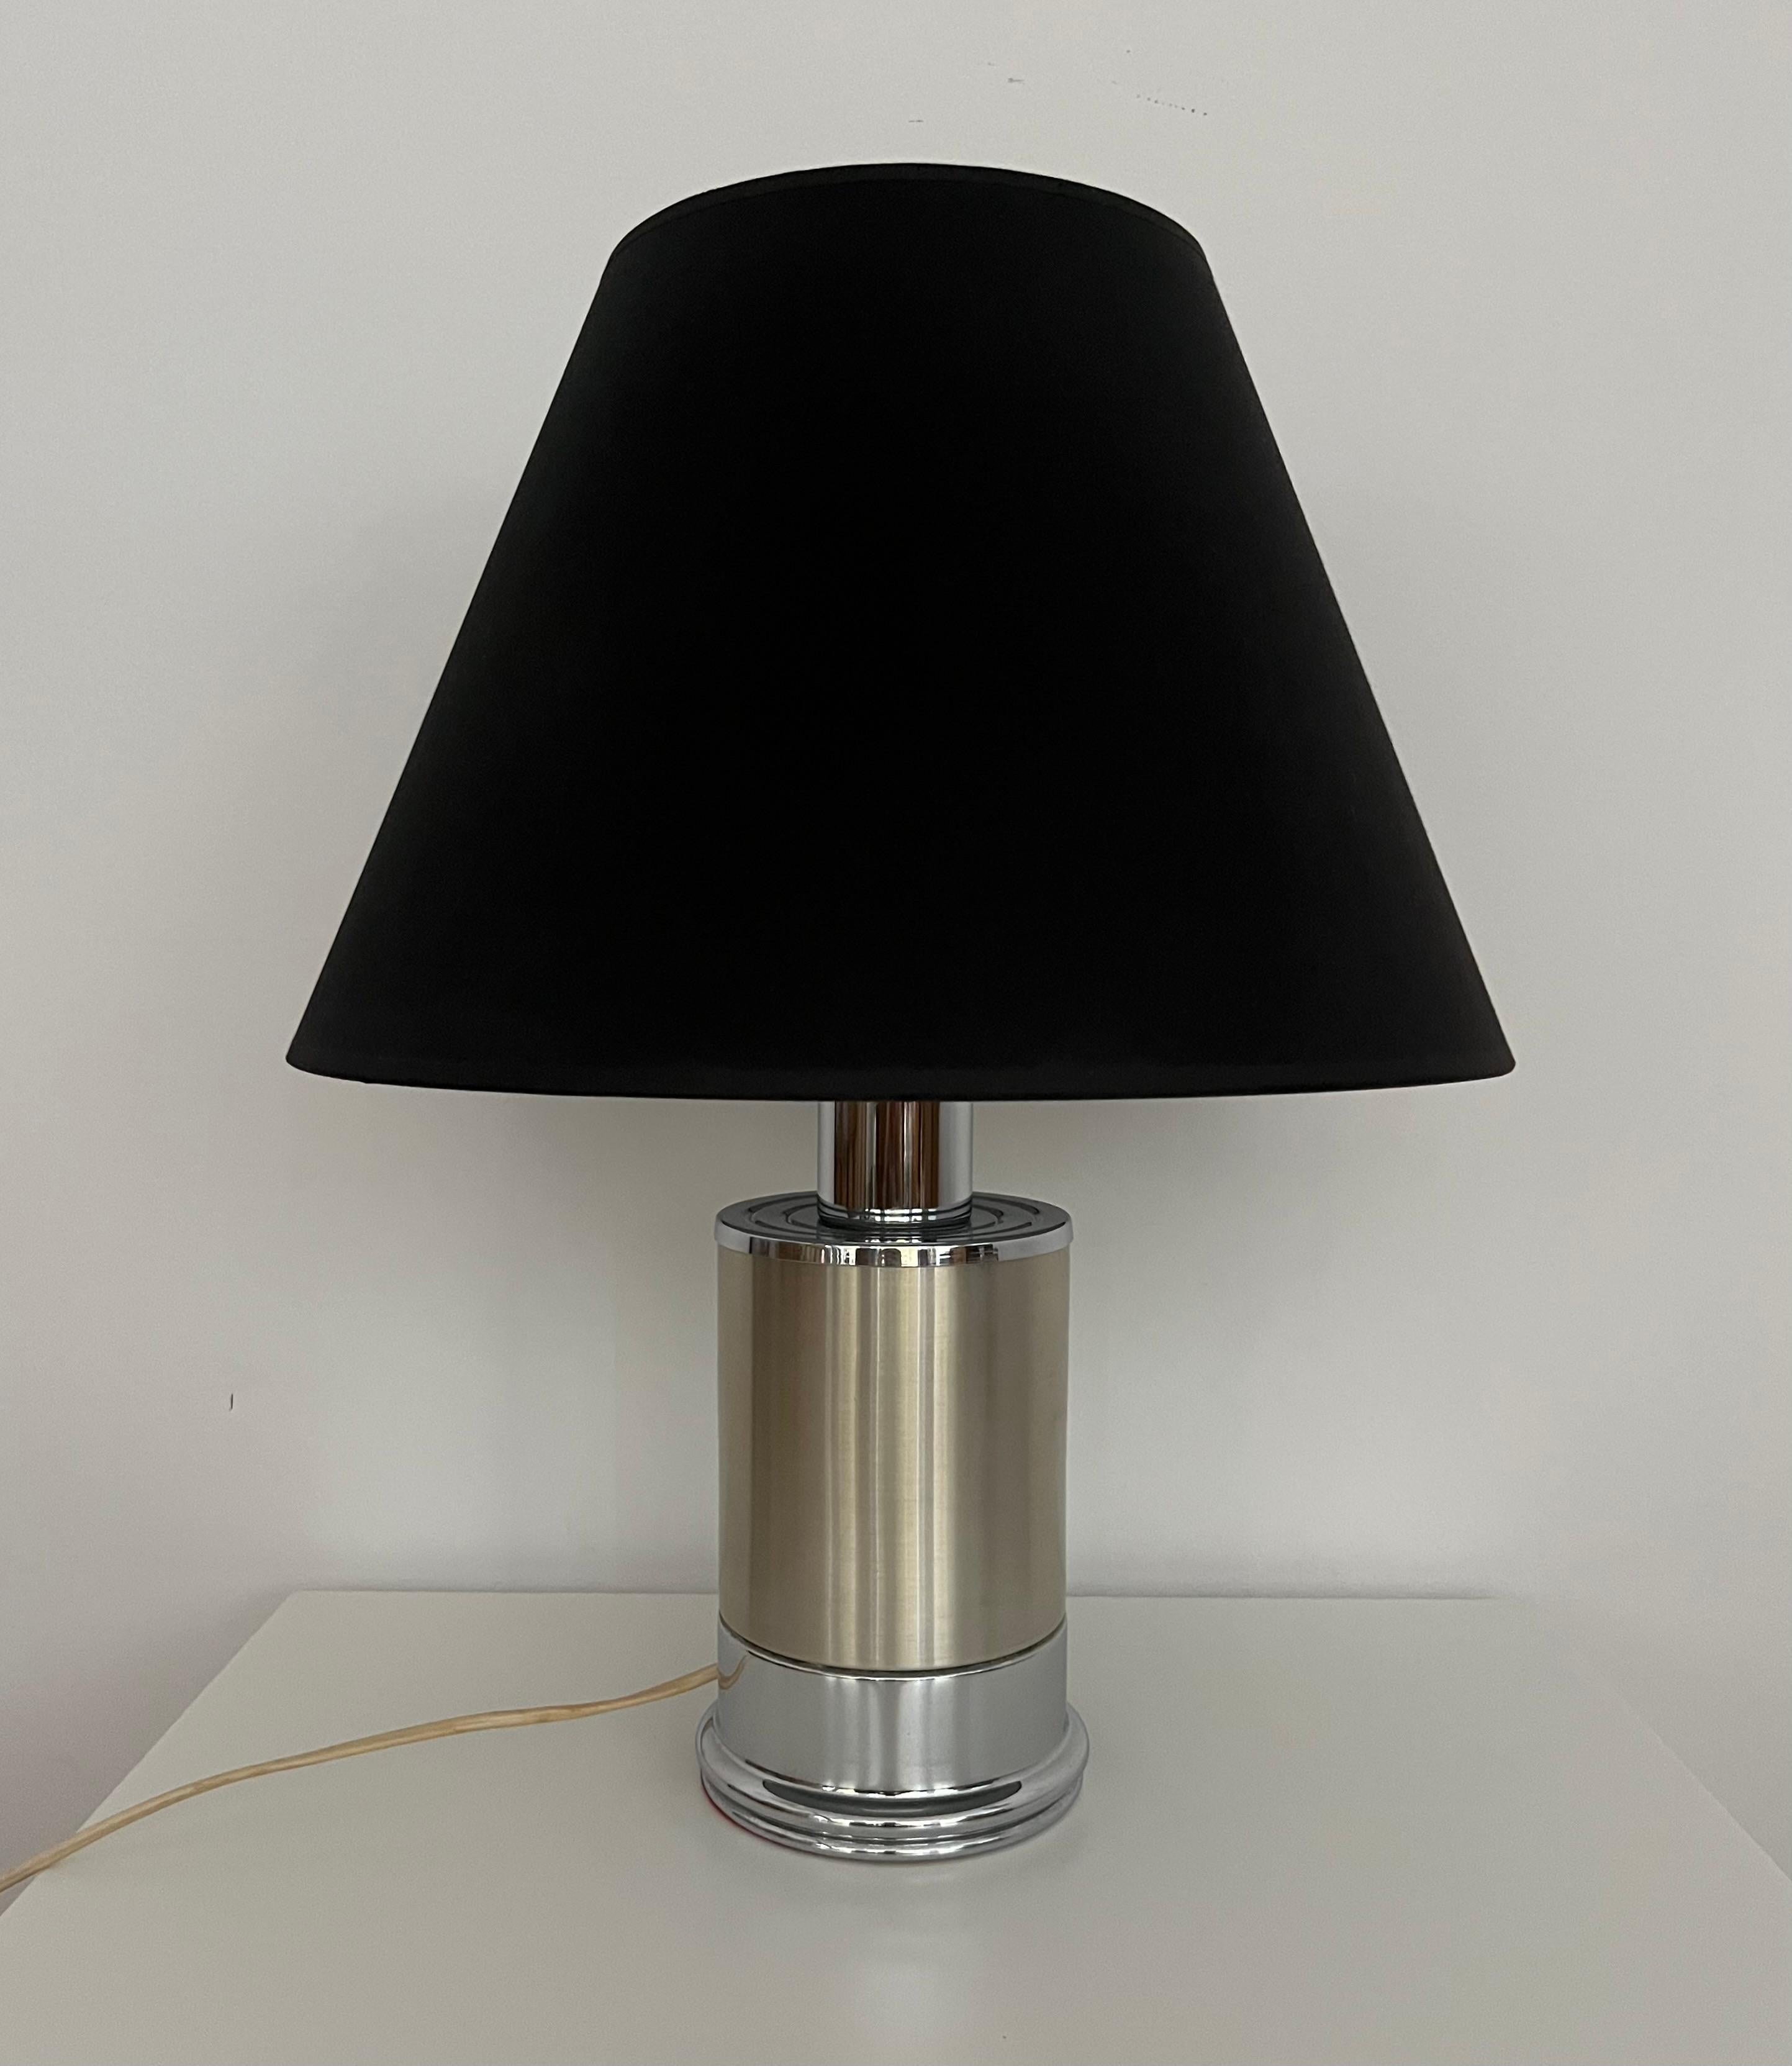 Charming Italian Mid-century Table Lamp. This Table Lamp was designed and manufactured in Italy during the 1970s. Black lampshade included.
Thia Lamp is equipped with one light socket (E27). 
A professional electrician has checked and prepared this